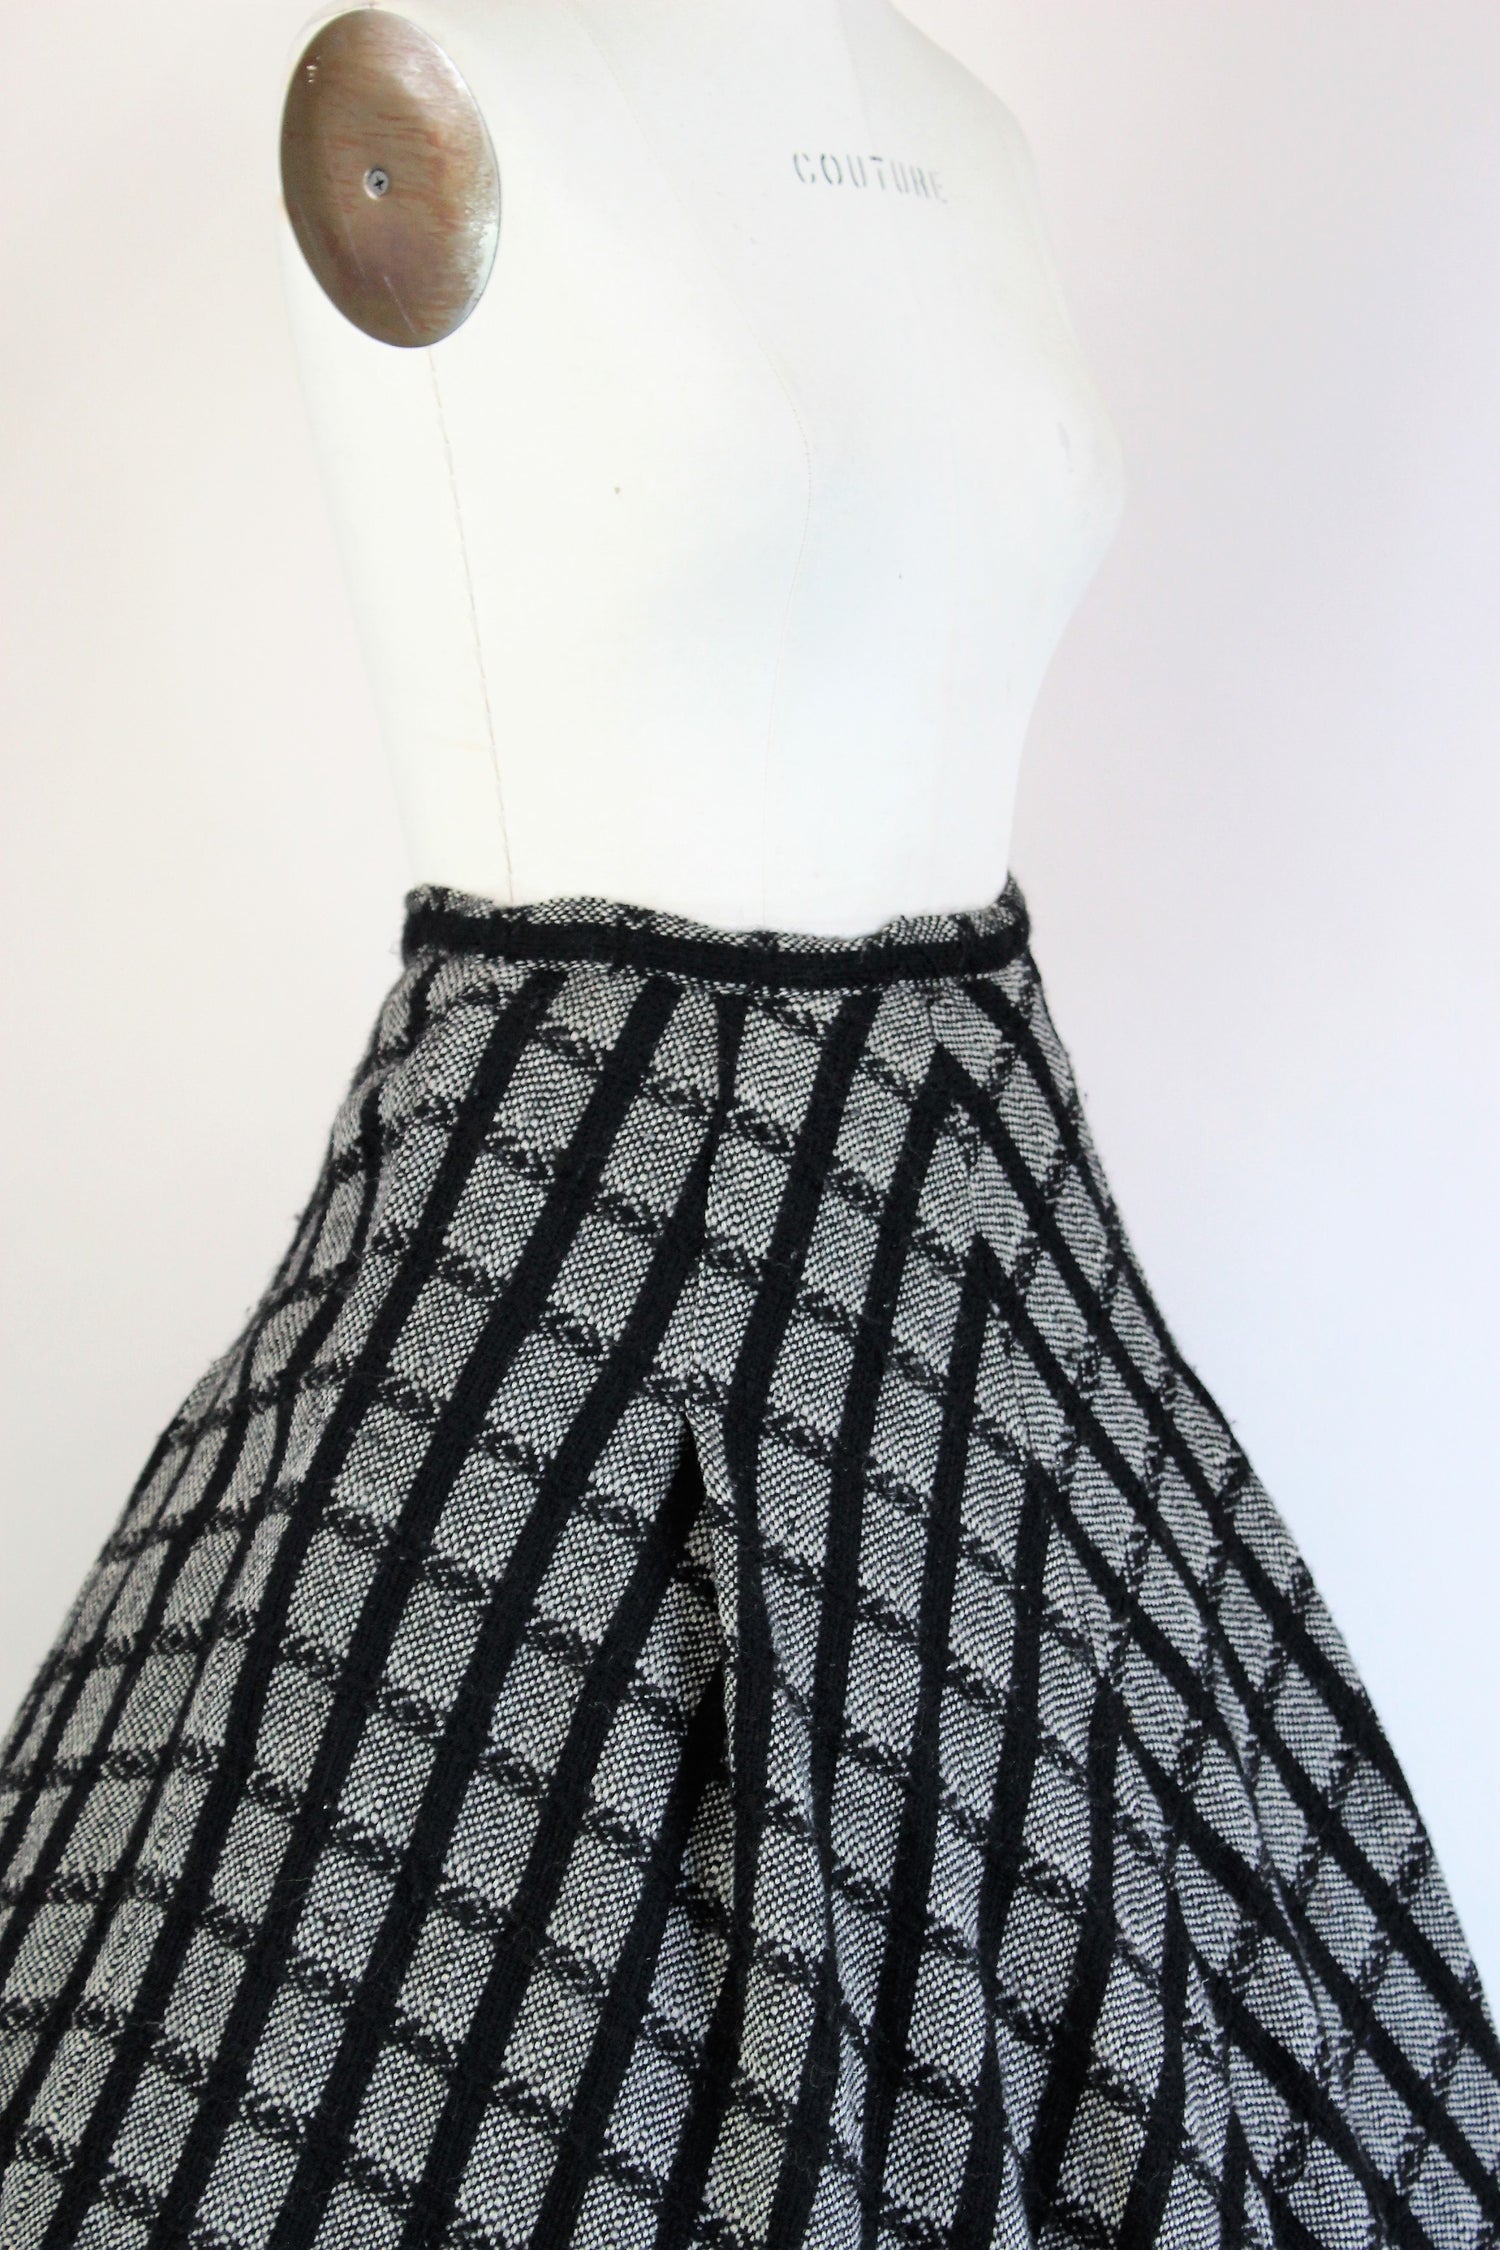 Vintage 1950s Black And White Wool Nelly De Grab Full Circle Skirt With Pocket